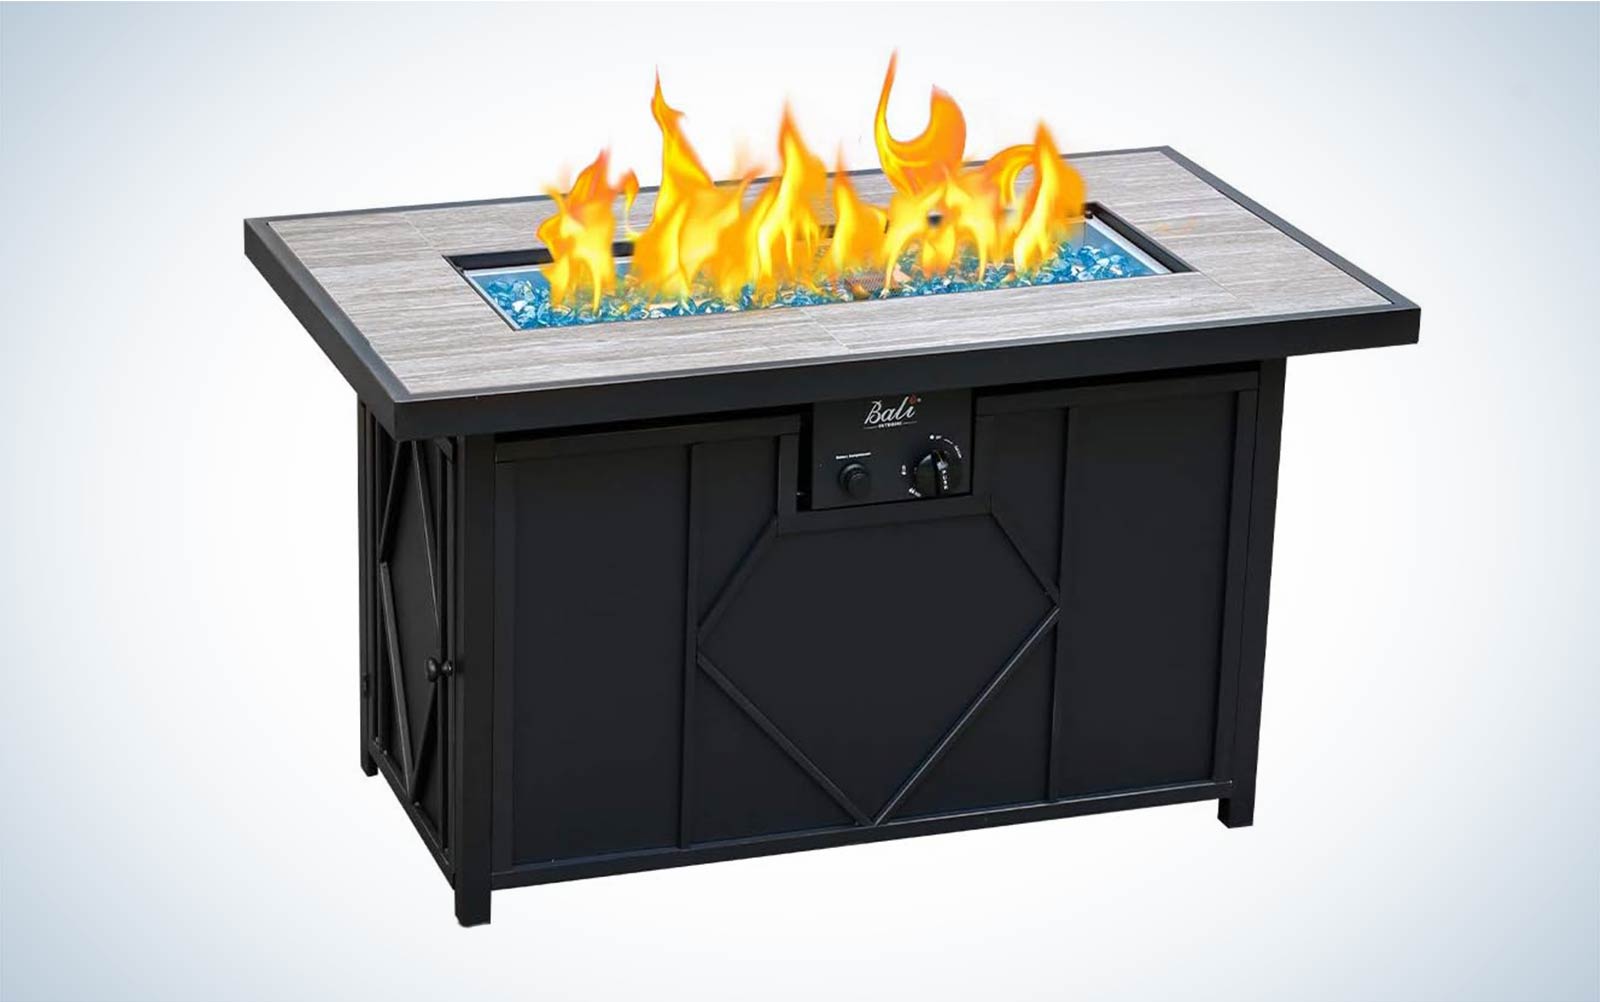 Bali Outdoors Propane Fire Pit on a plain background with flames